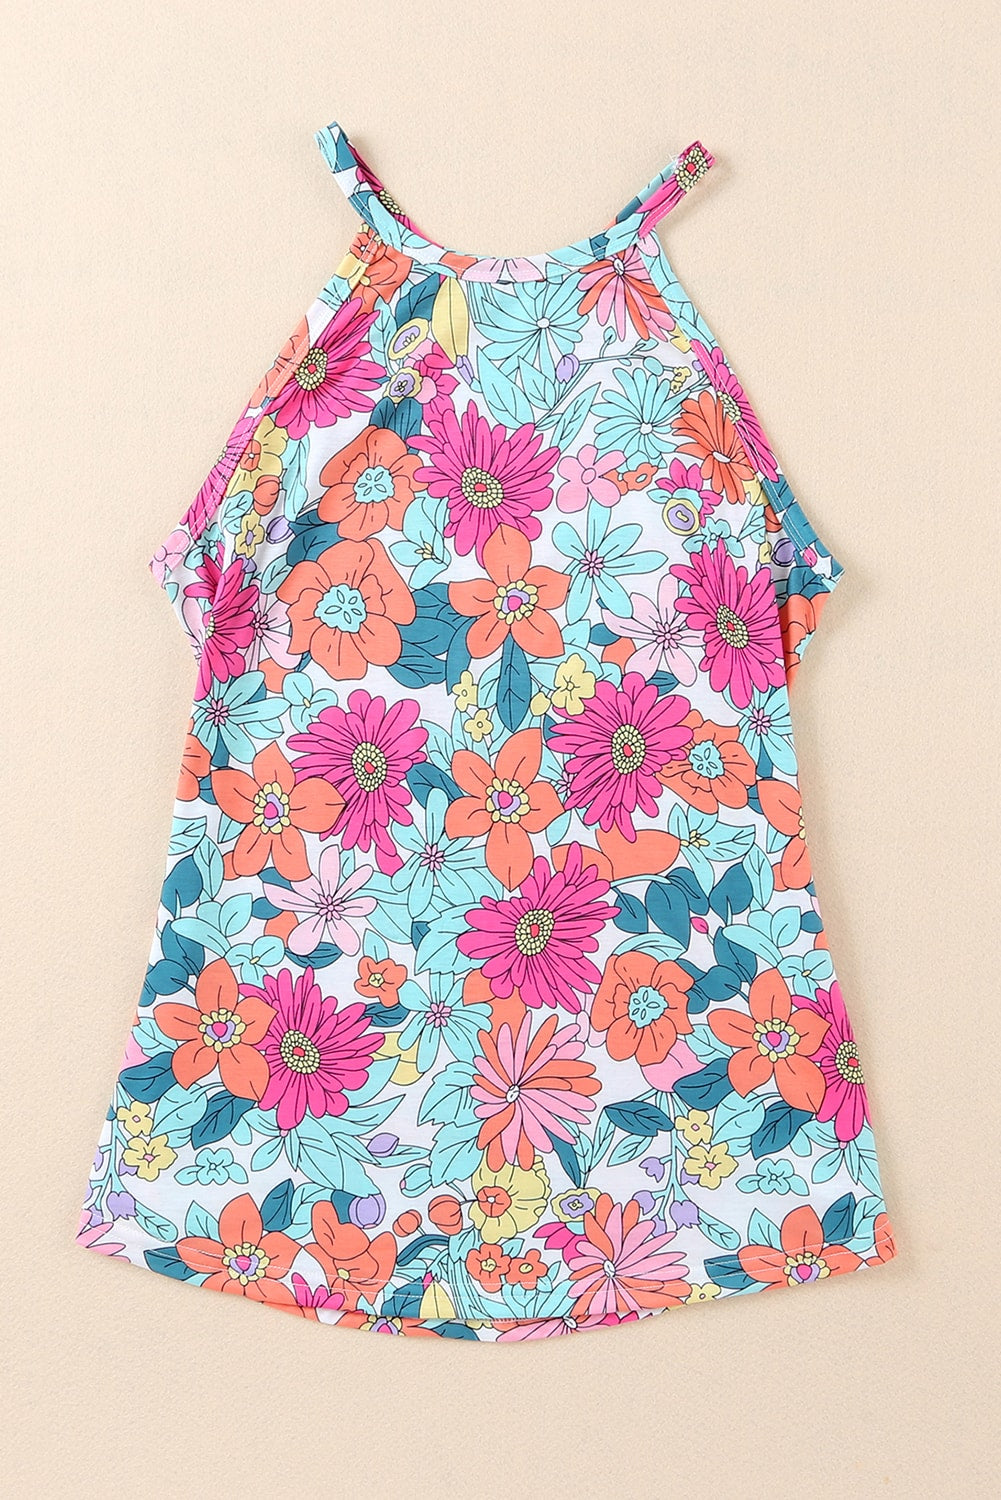 Blue Multicolor Floral Print Sleeveless Tank Top